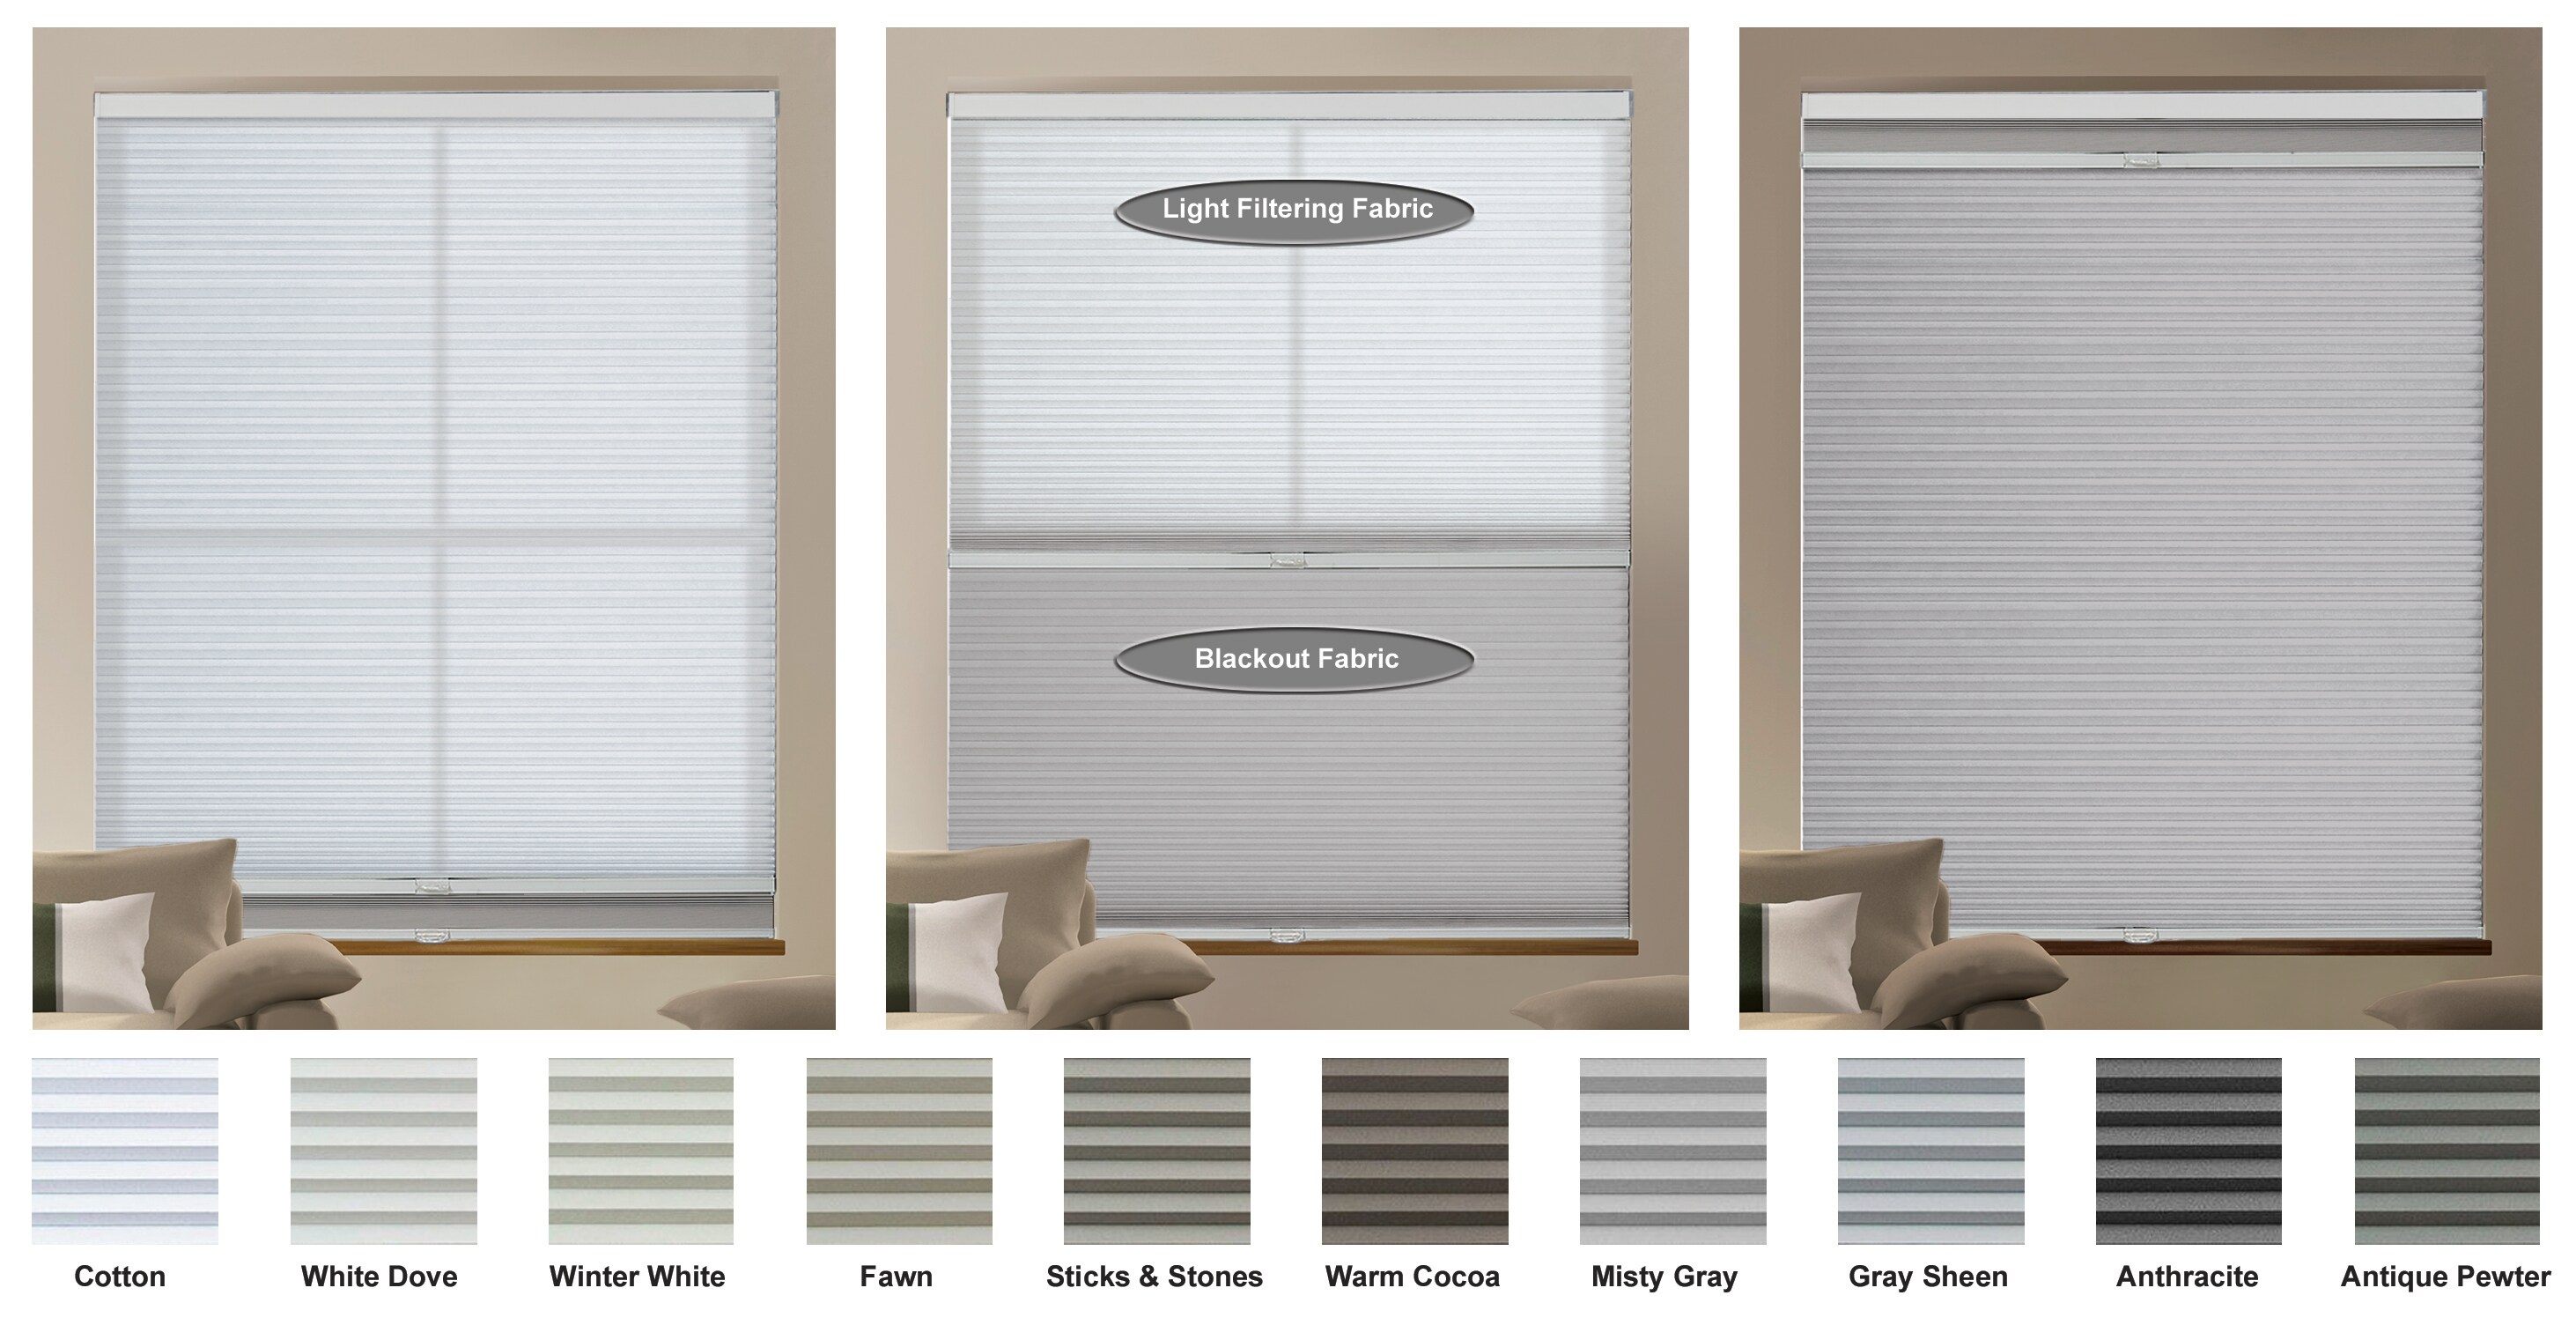 BlindsAvenue Gray Sheen Cordless Blackout Cellular Honeycomb Shade, 9/16 in. Single Cell, 44.5 in. W x 72 in. H